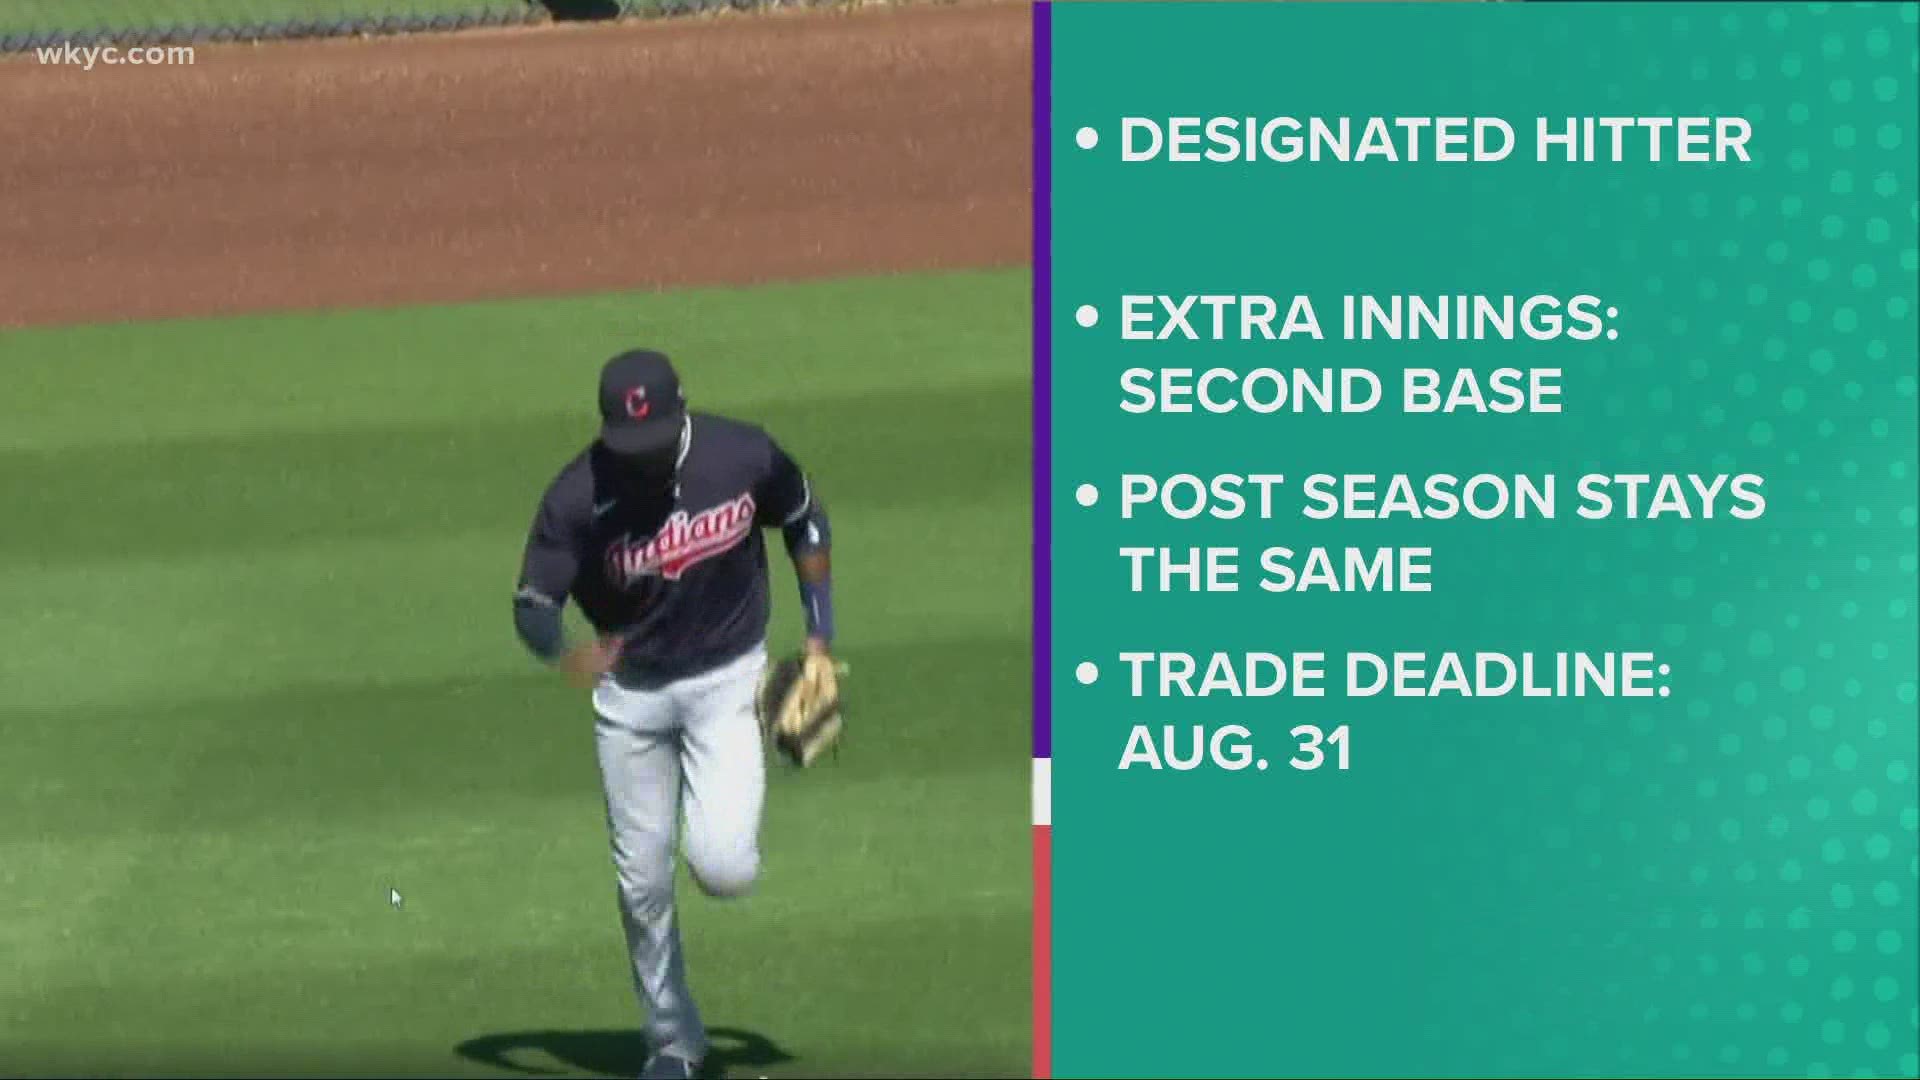 Mlb Has New Rules In Place For The Season Newswest9 Com